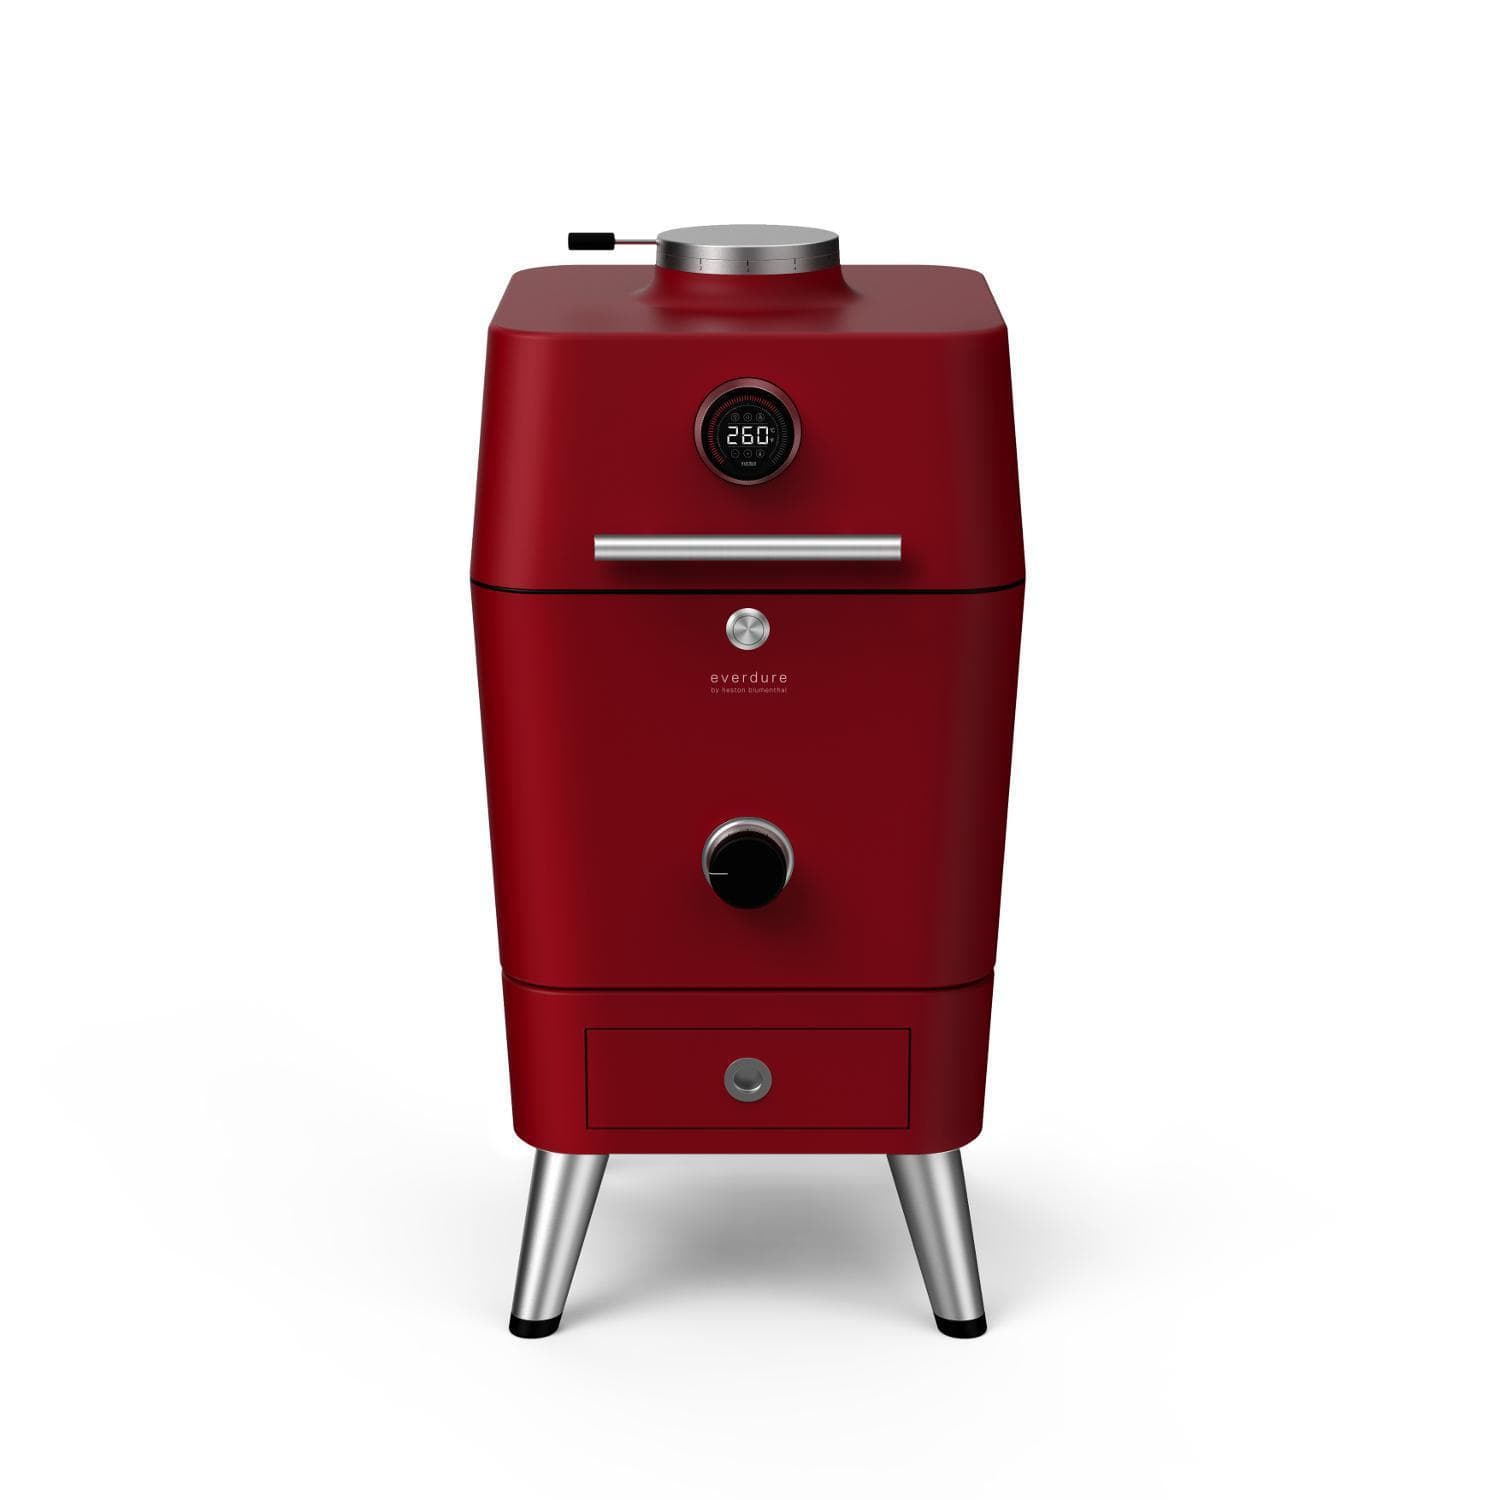 Everdure Charcoal Grill Red Everdure By Heston Blumenthal 4K 21-Inch Charcoal Grill & Smoker